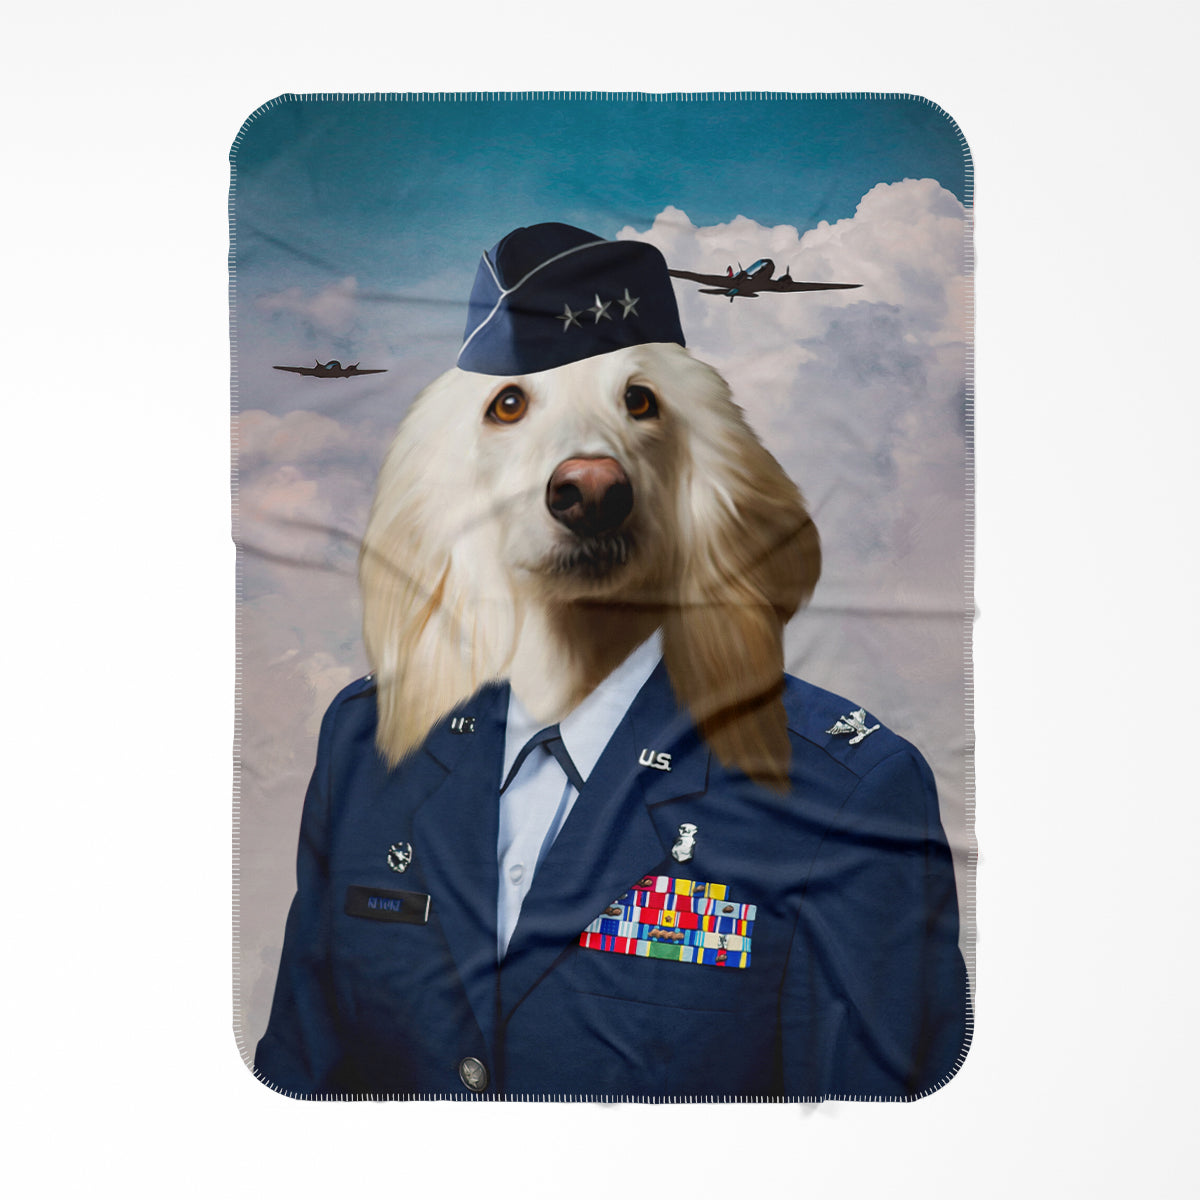 The US Female Airforce Officer: Paw & Glory, paw and glory, pet blanket, dog photo blanket, personalised blanket with dog, pet art blanket, blanket with dog on it, personalized cat blankets, Pet Portraits blanket